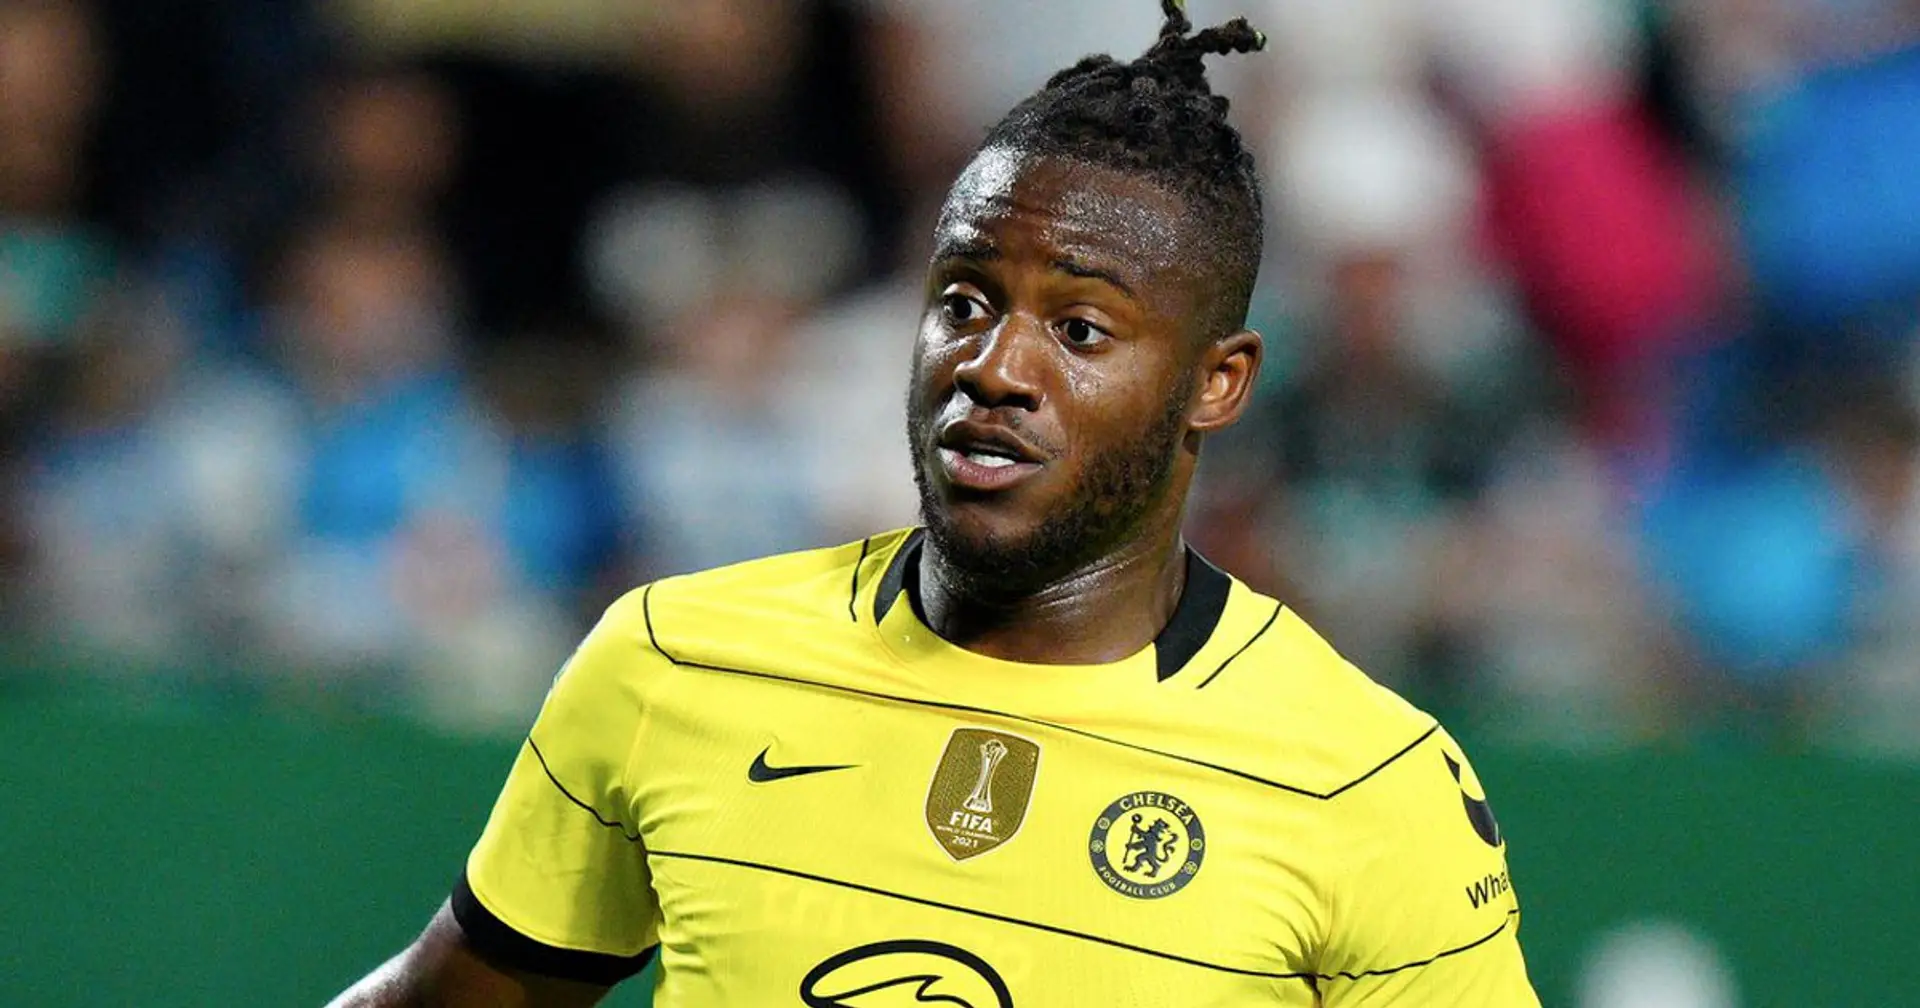 Nottingham Forest closing in on Michy Batshuayi signing (reliability: 5 stars)